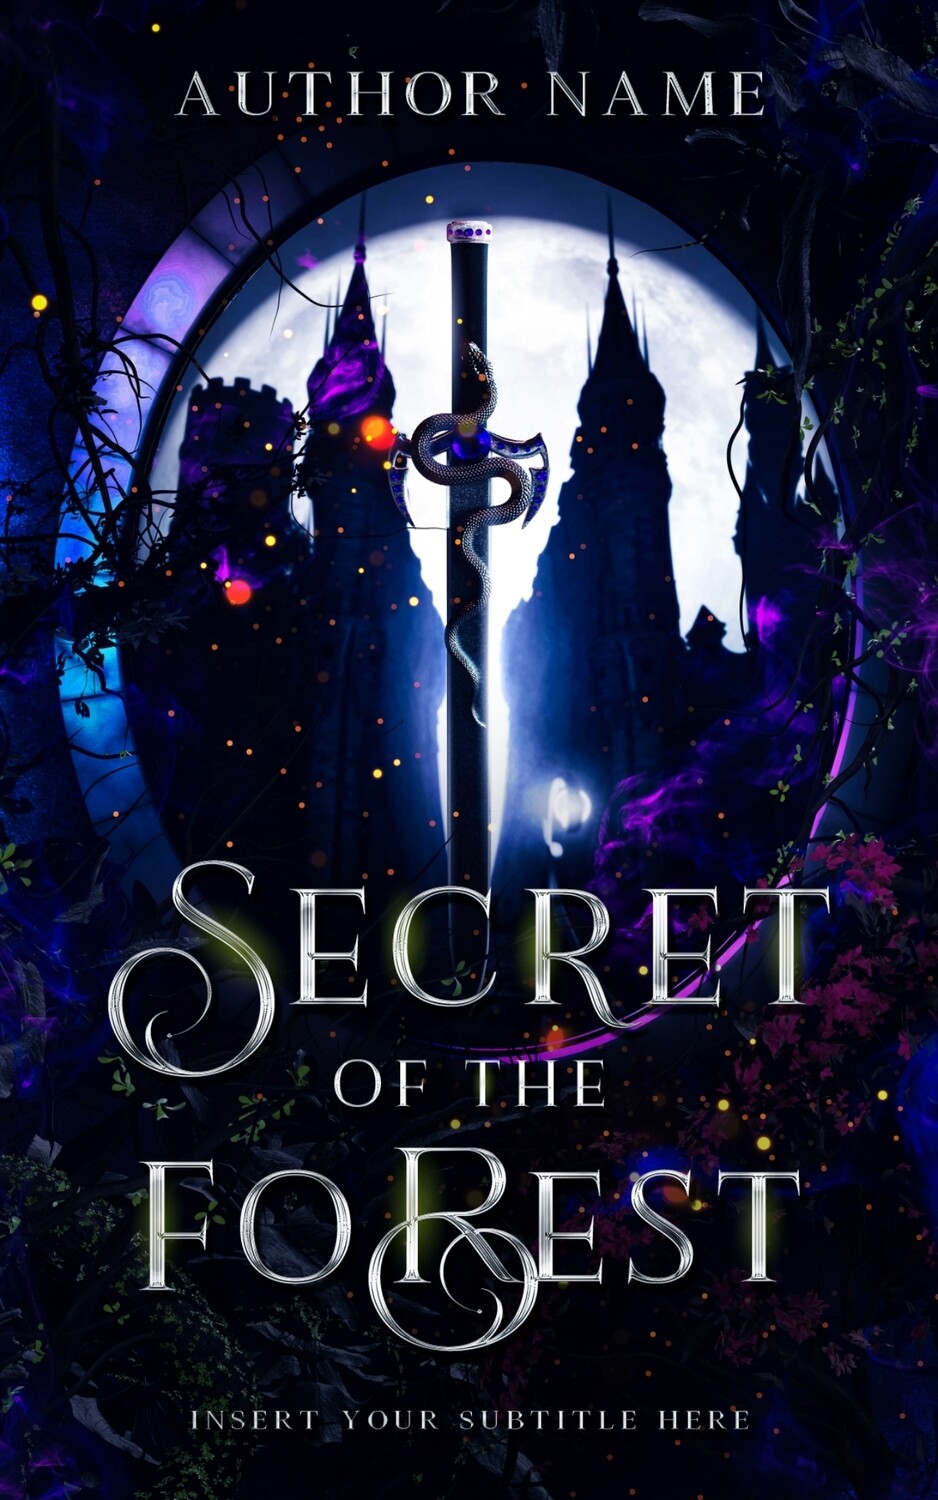 Ebook: Secret of the Forest